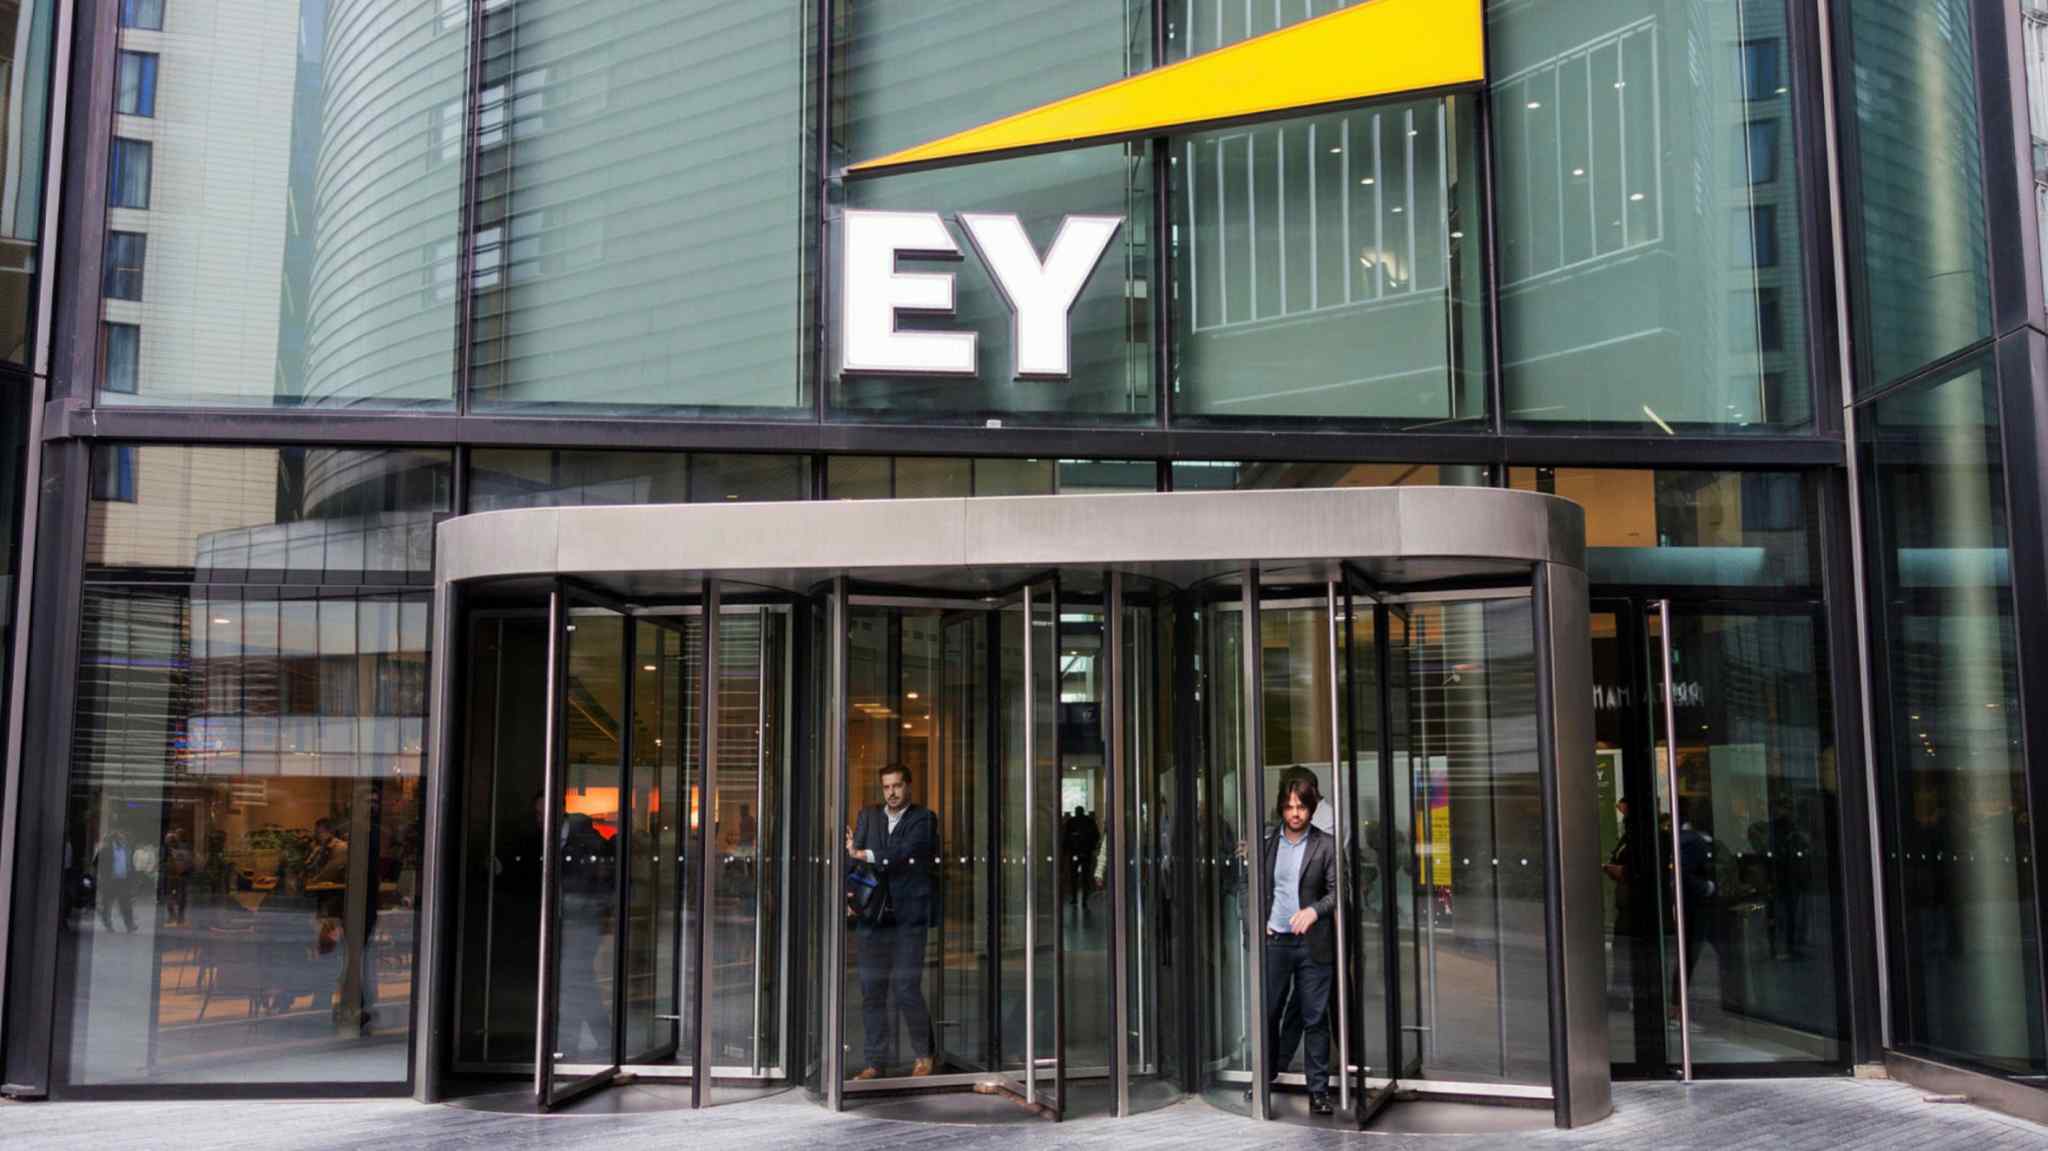 EY explores IPO or partial sale of global advisory business